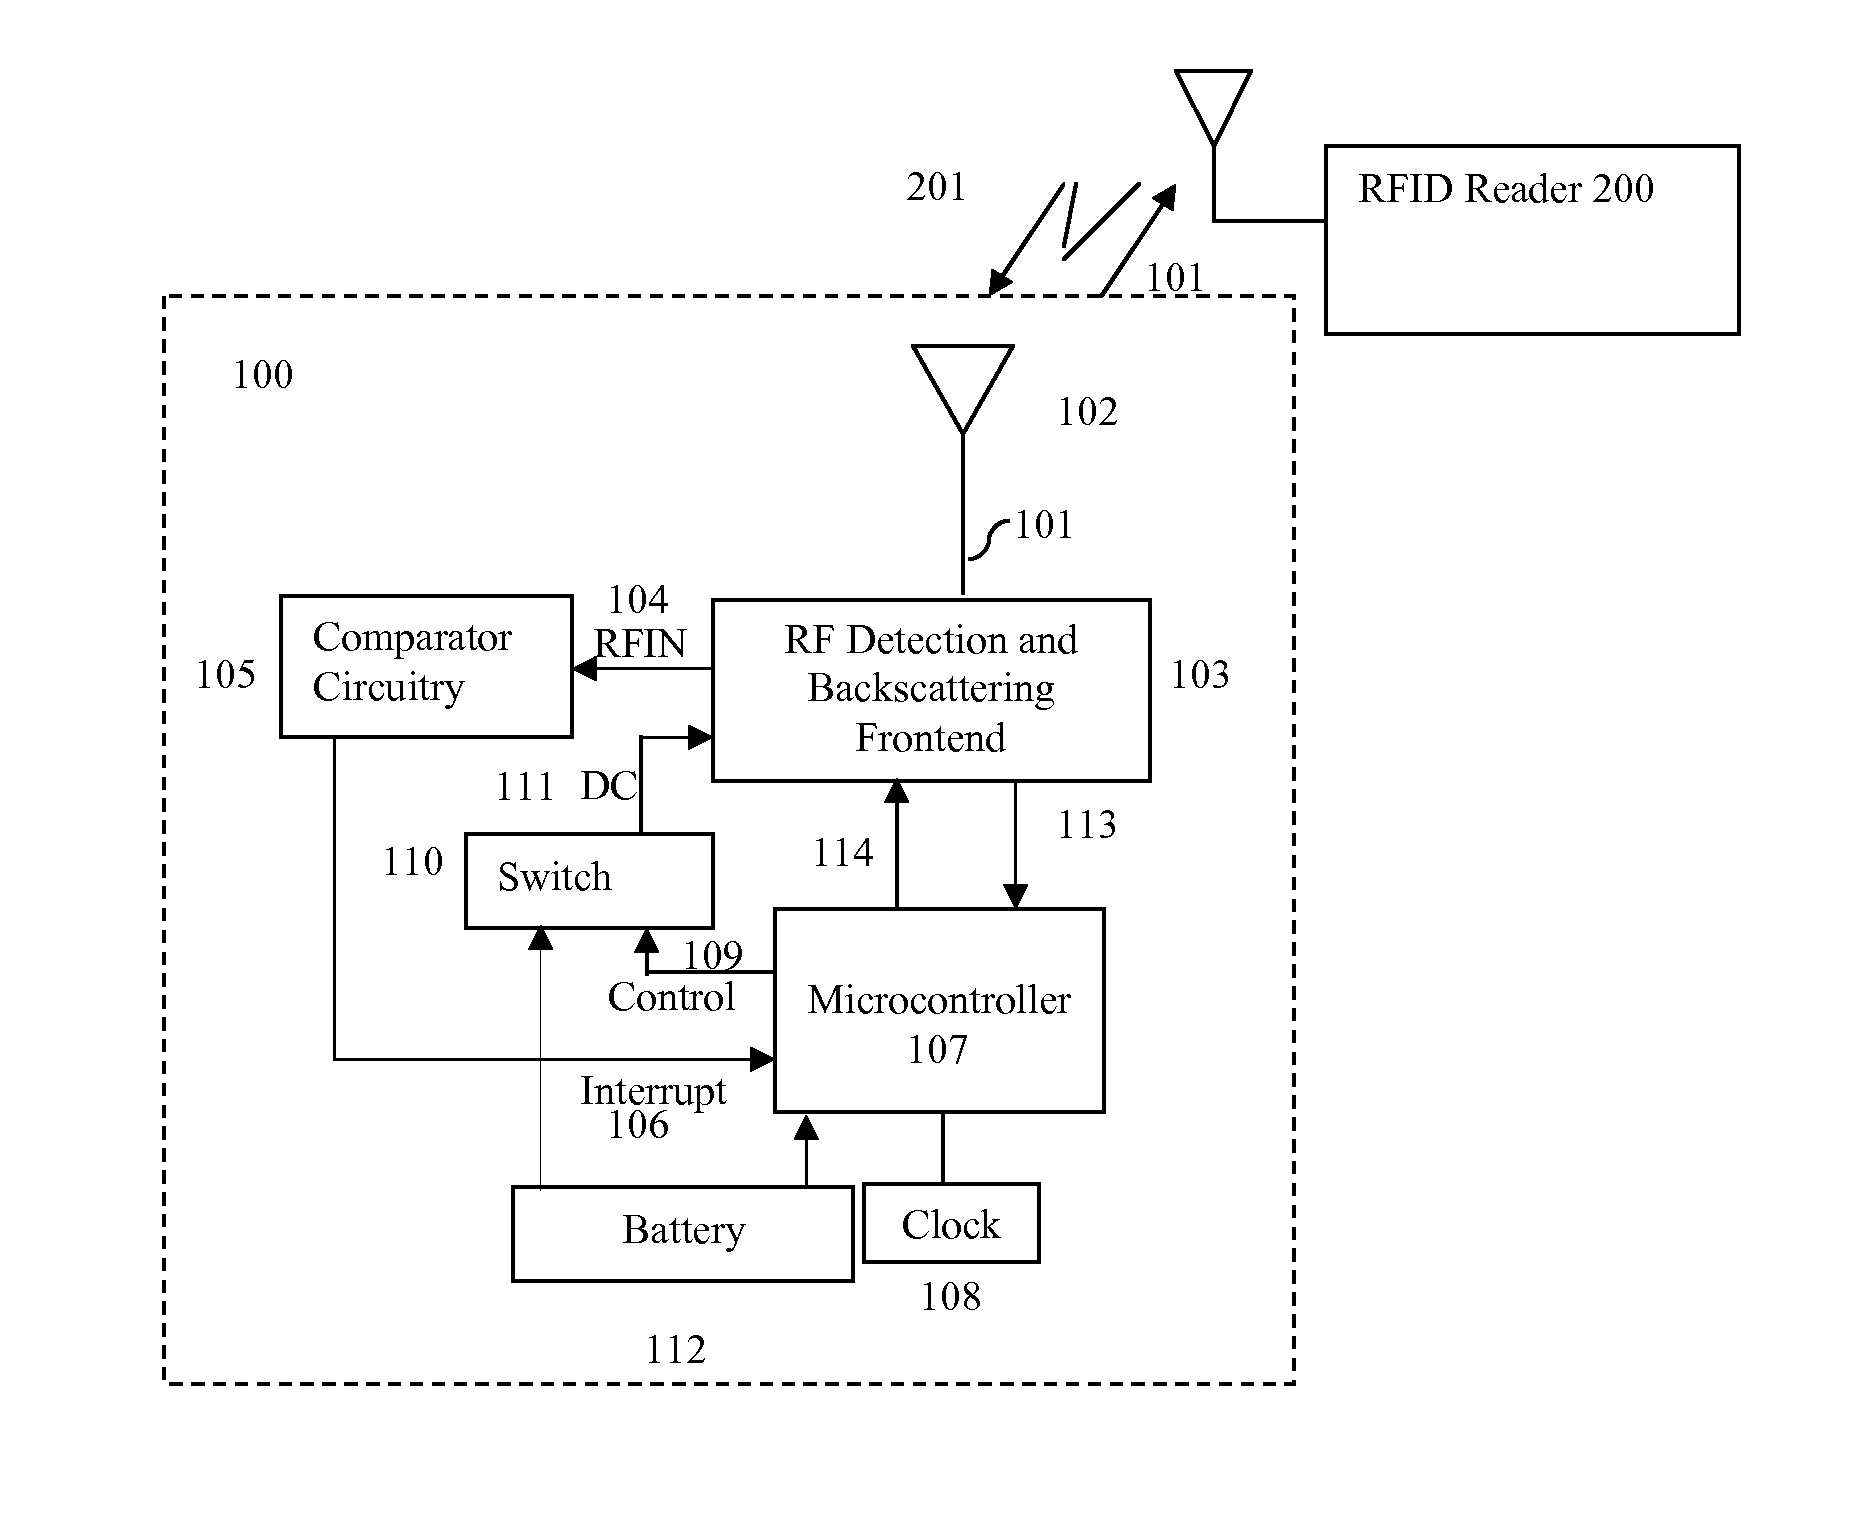 Method and system for low cost, power efficient, wireless transponder devices with enhanced functionality